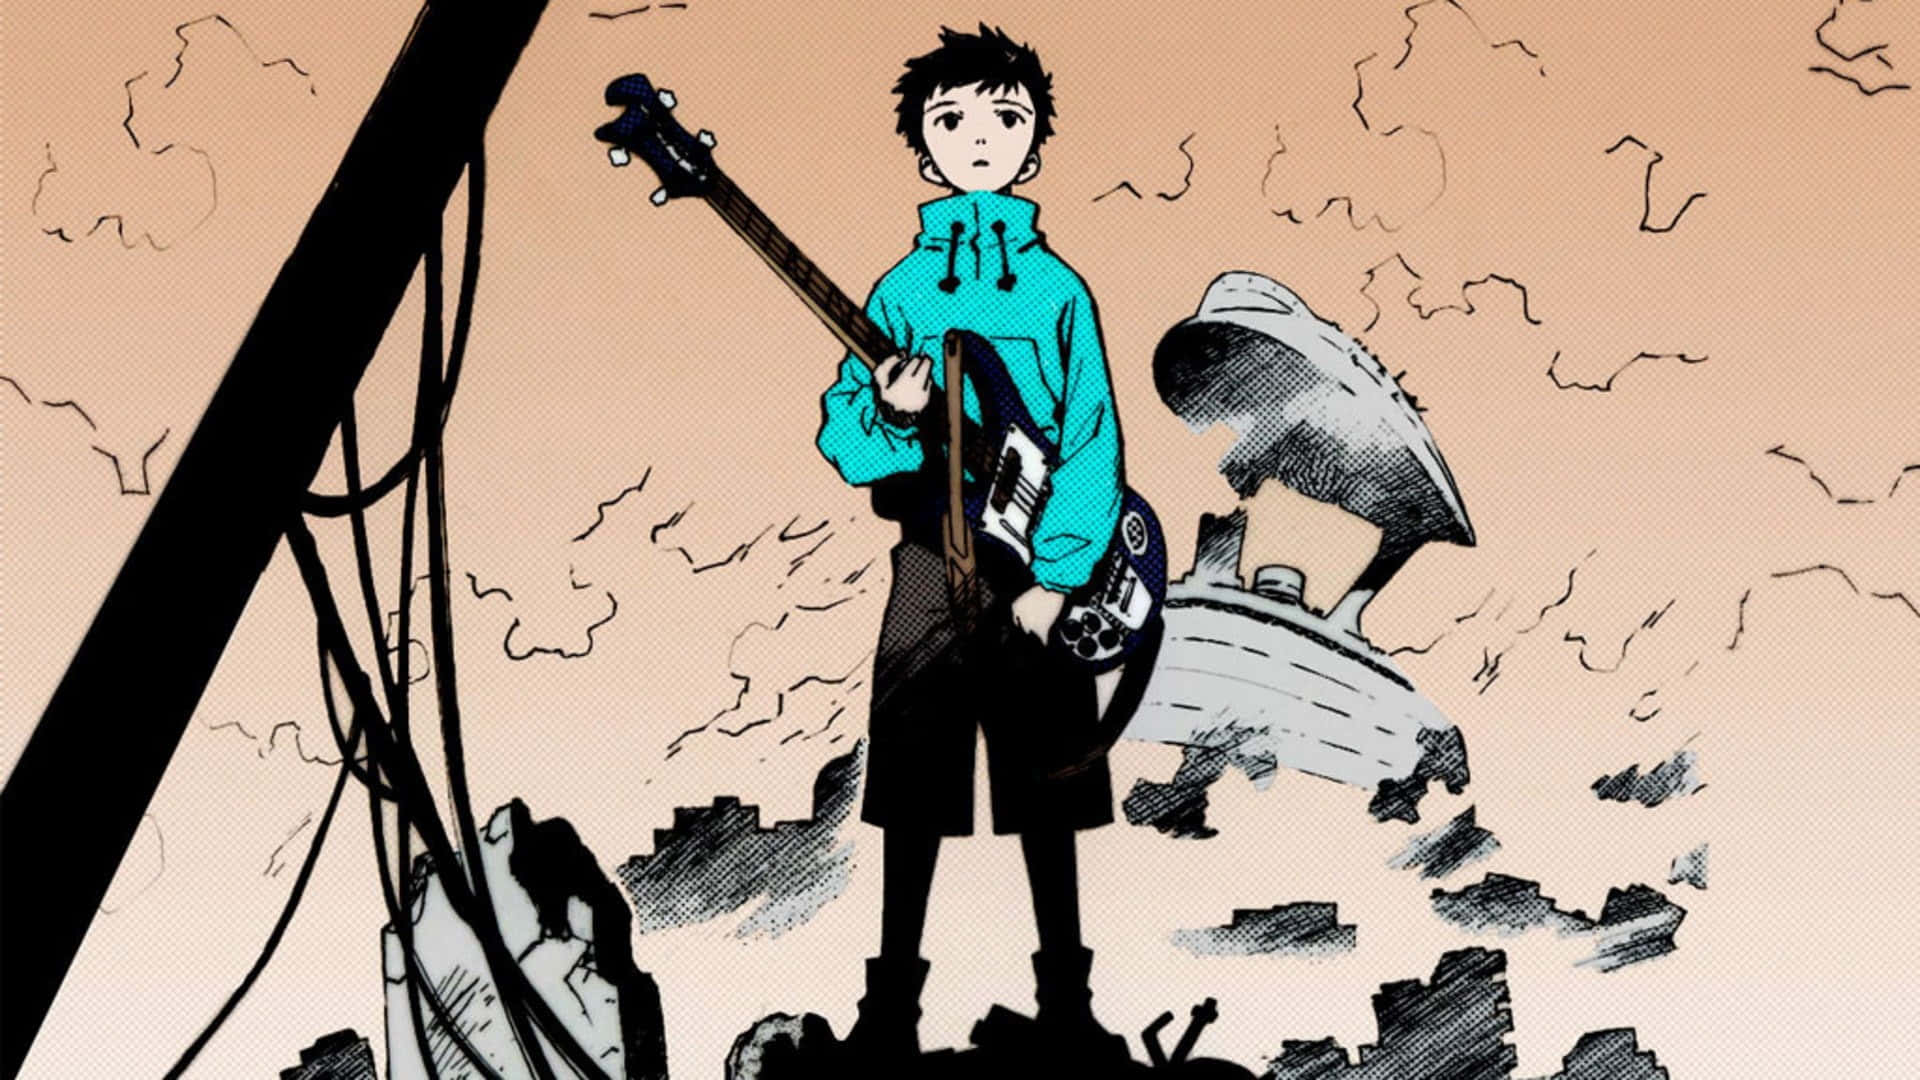 Naota Nandaba, the young protagonist of FLCL, dreamily gazing into the distance. Wallpaper